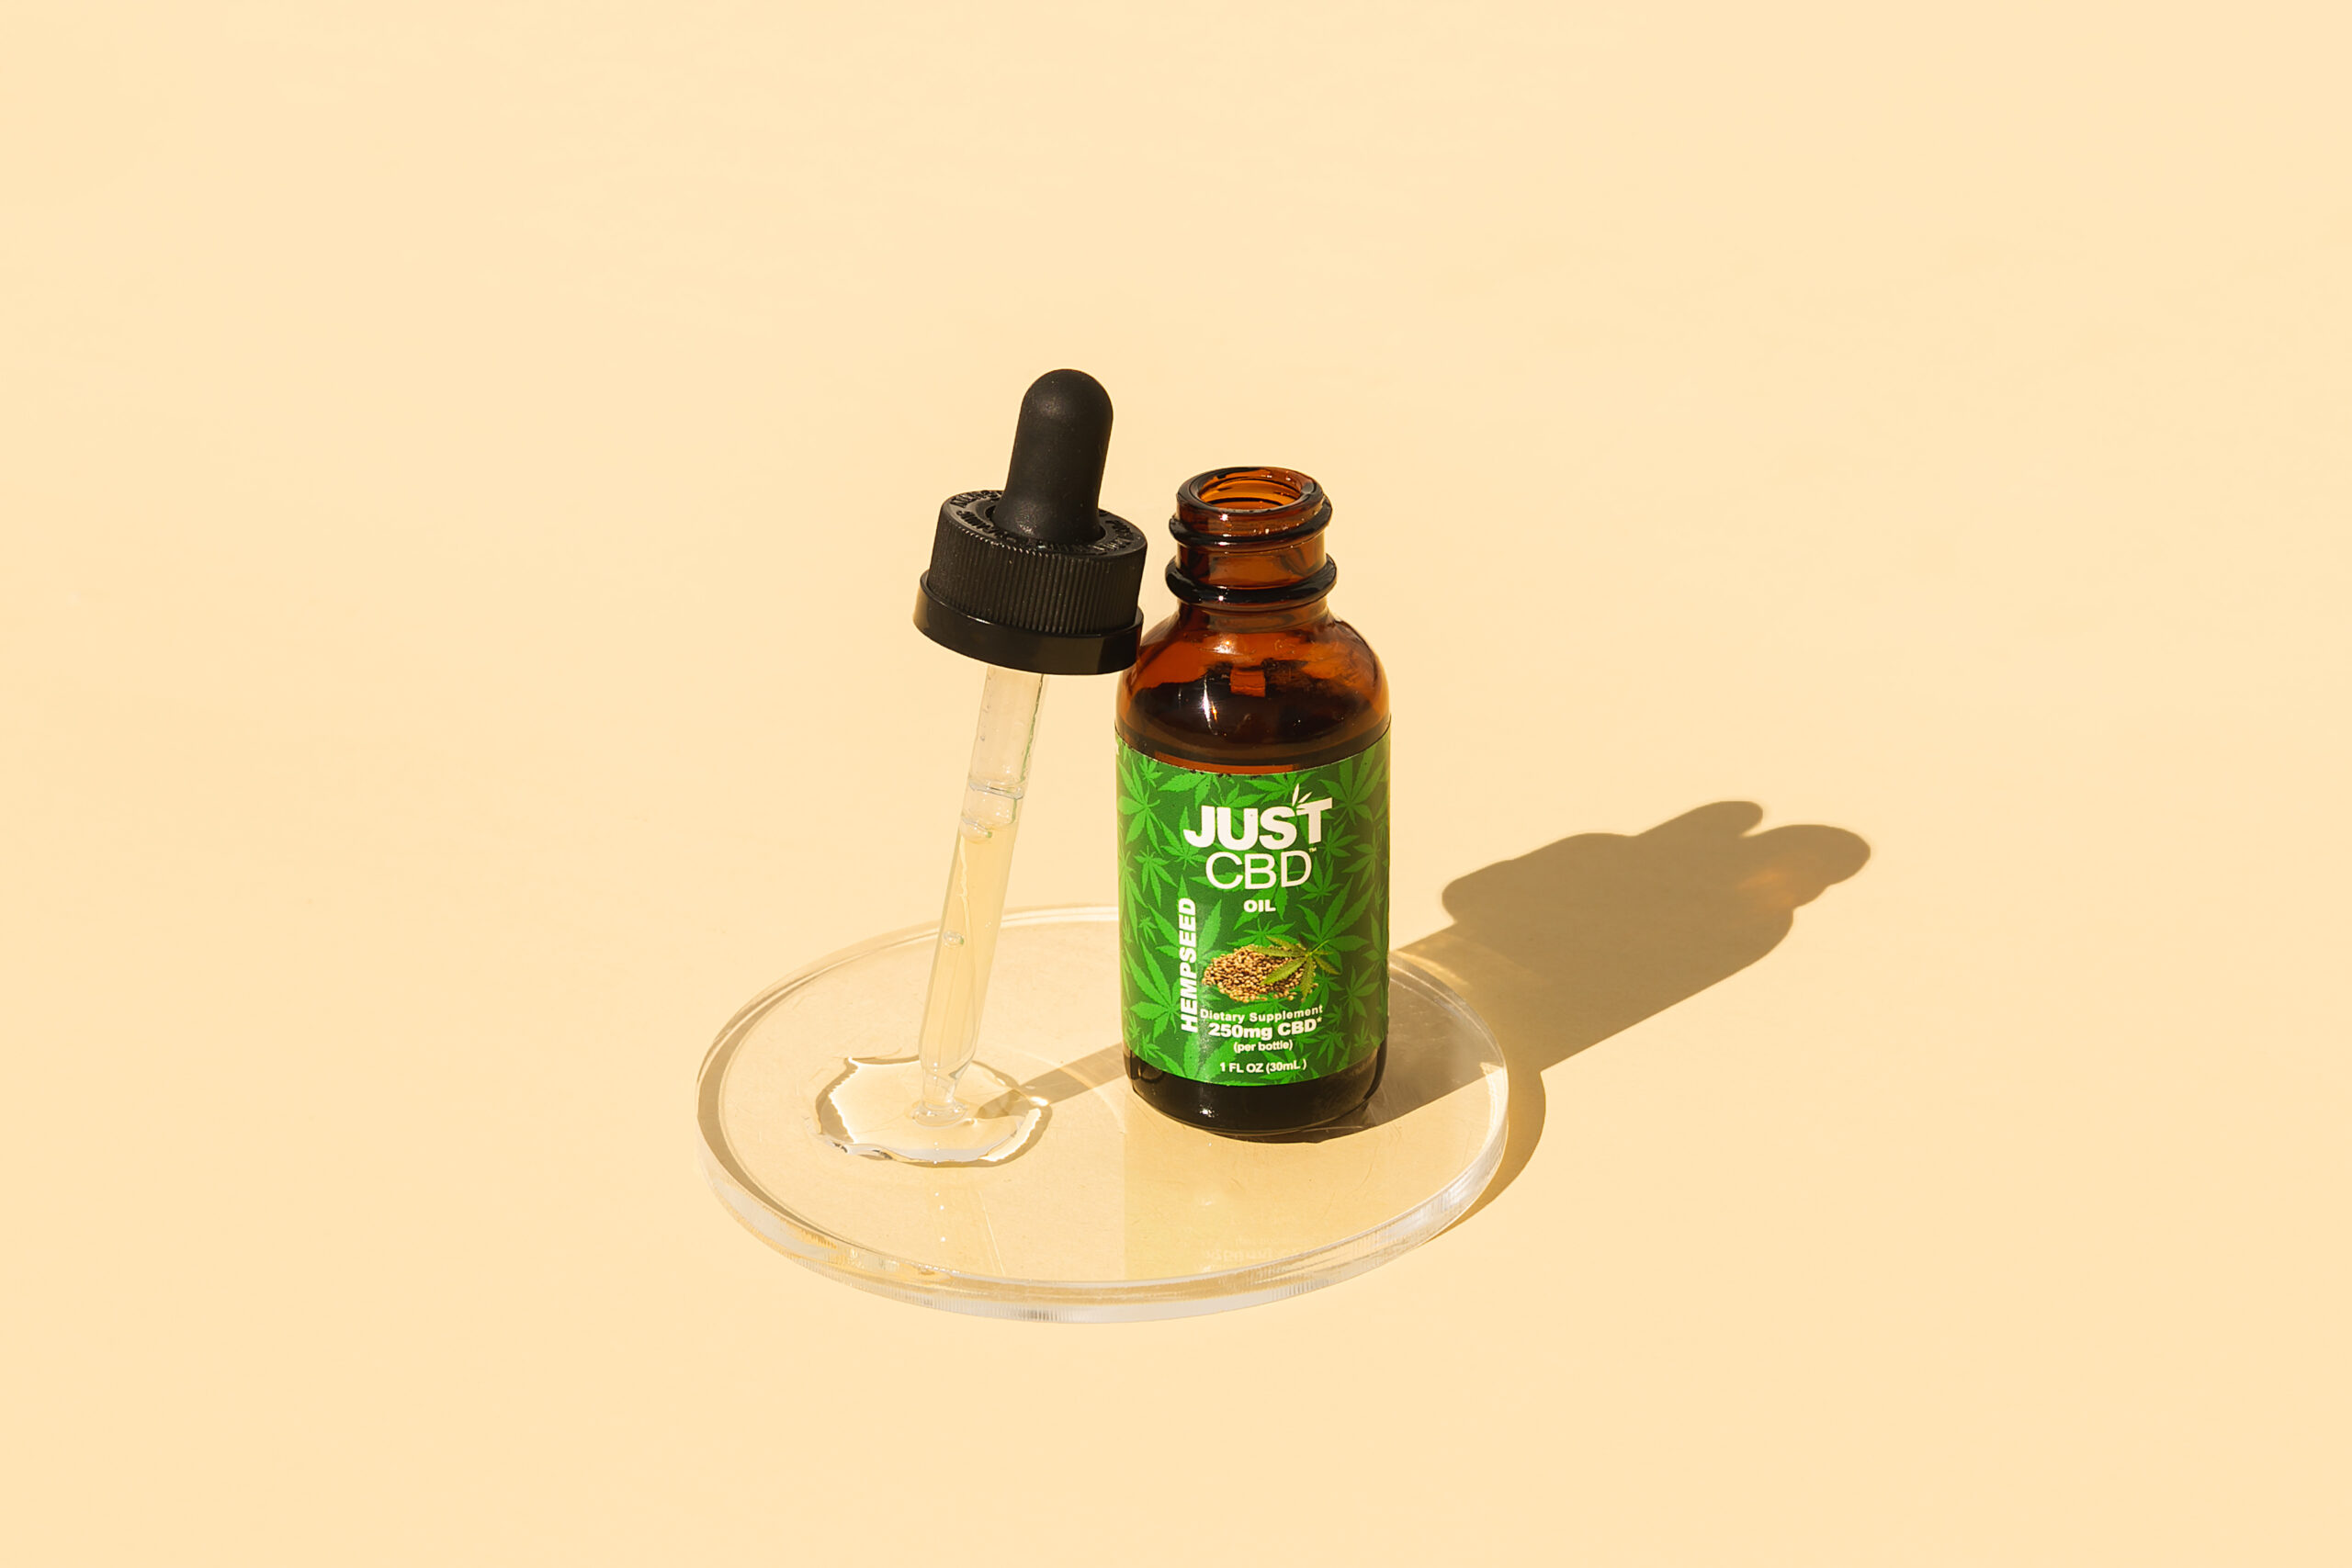 HOW TO START YOUR CBD OIL COMPANY